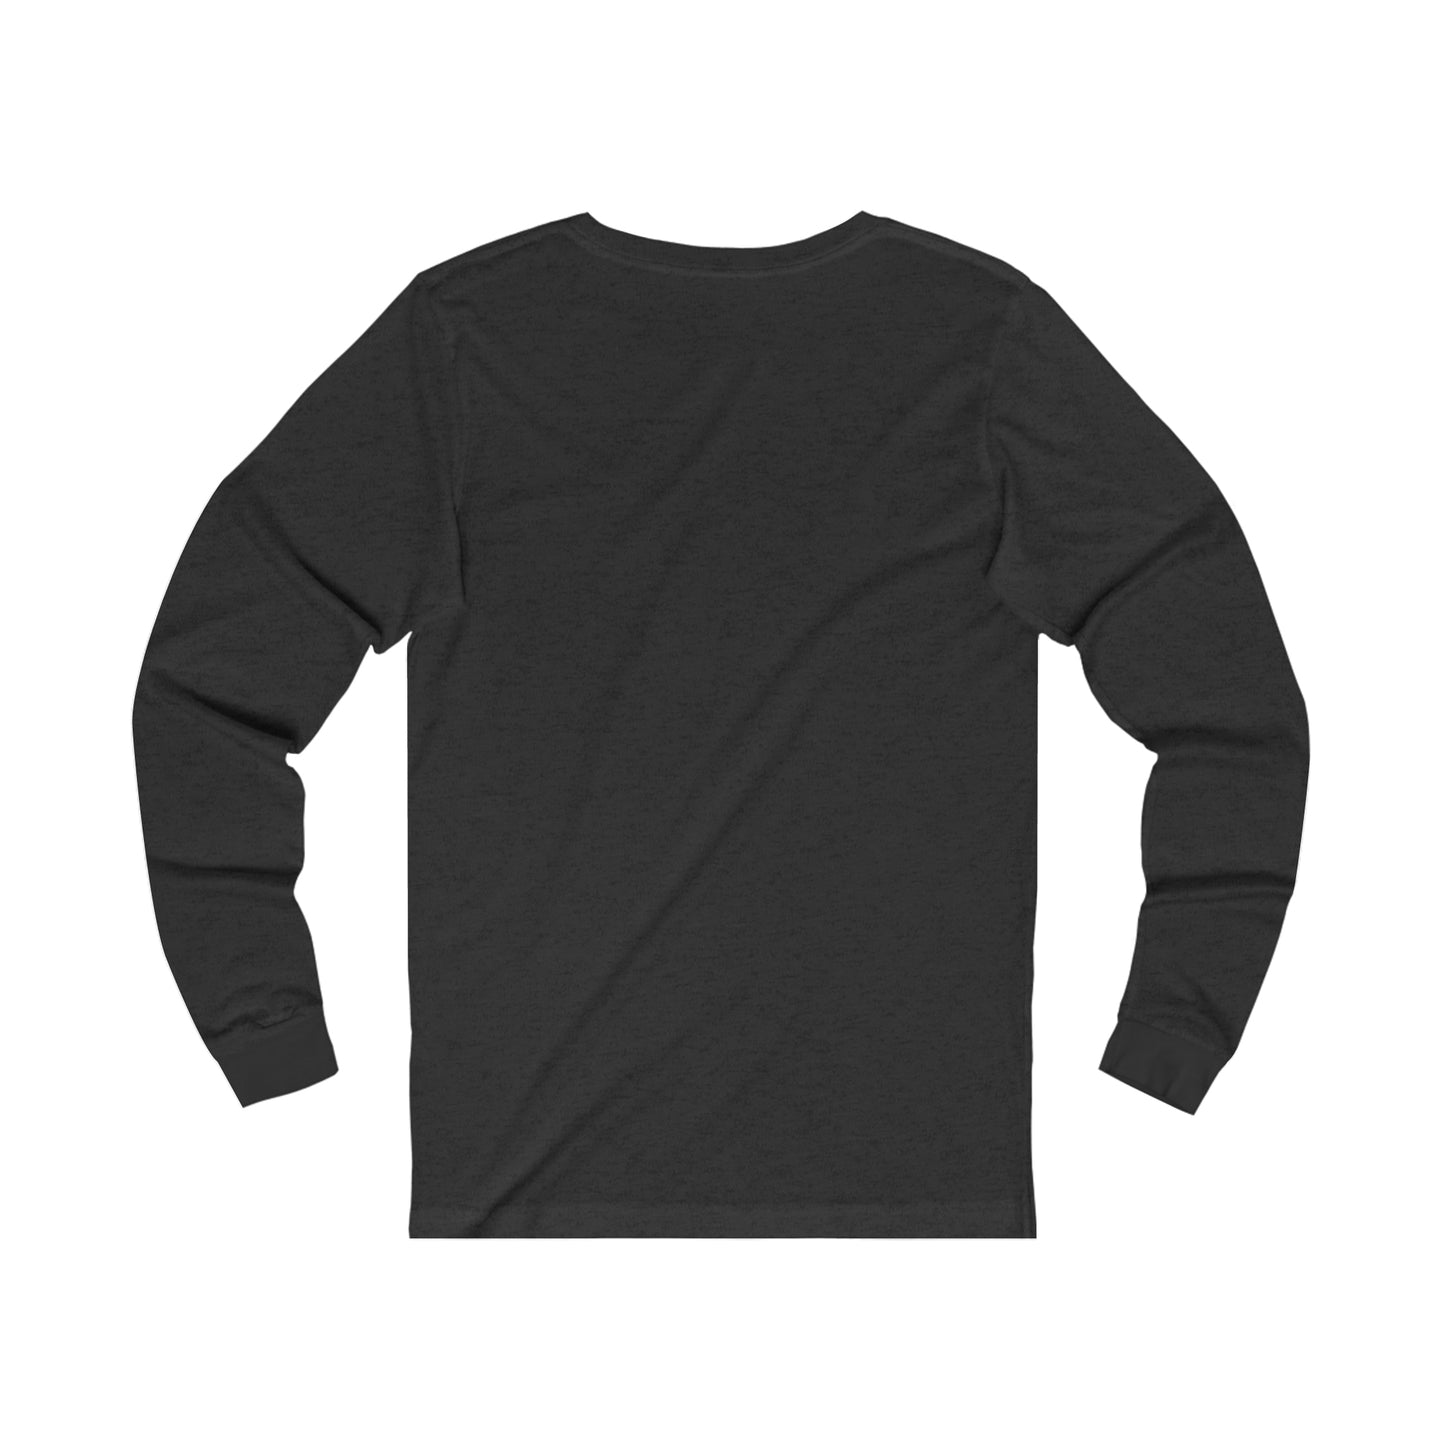 ALL BOOKED FOR CHRISTMAS Unisex Jersey Long Sleeve Tee